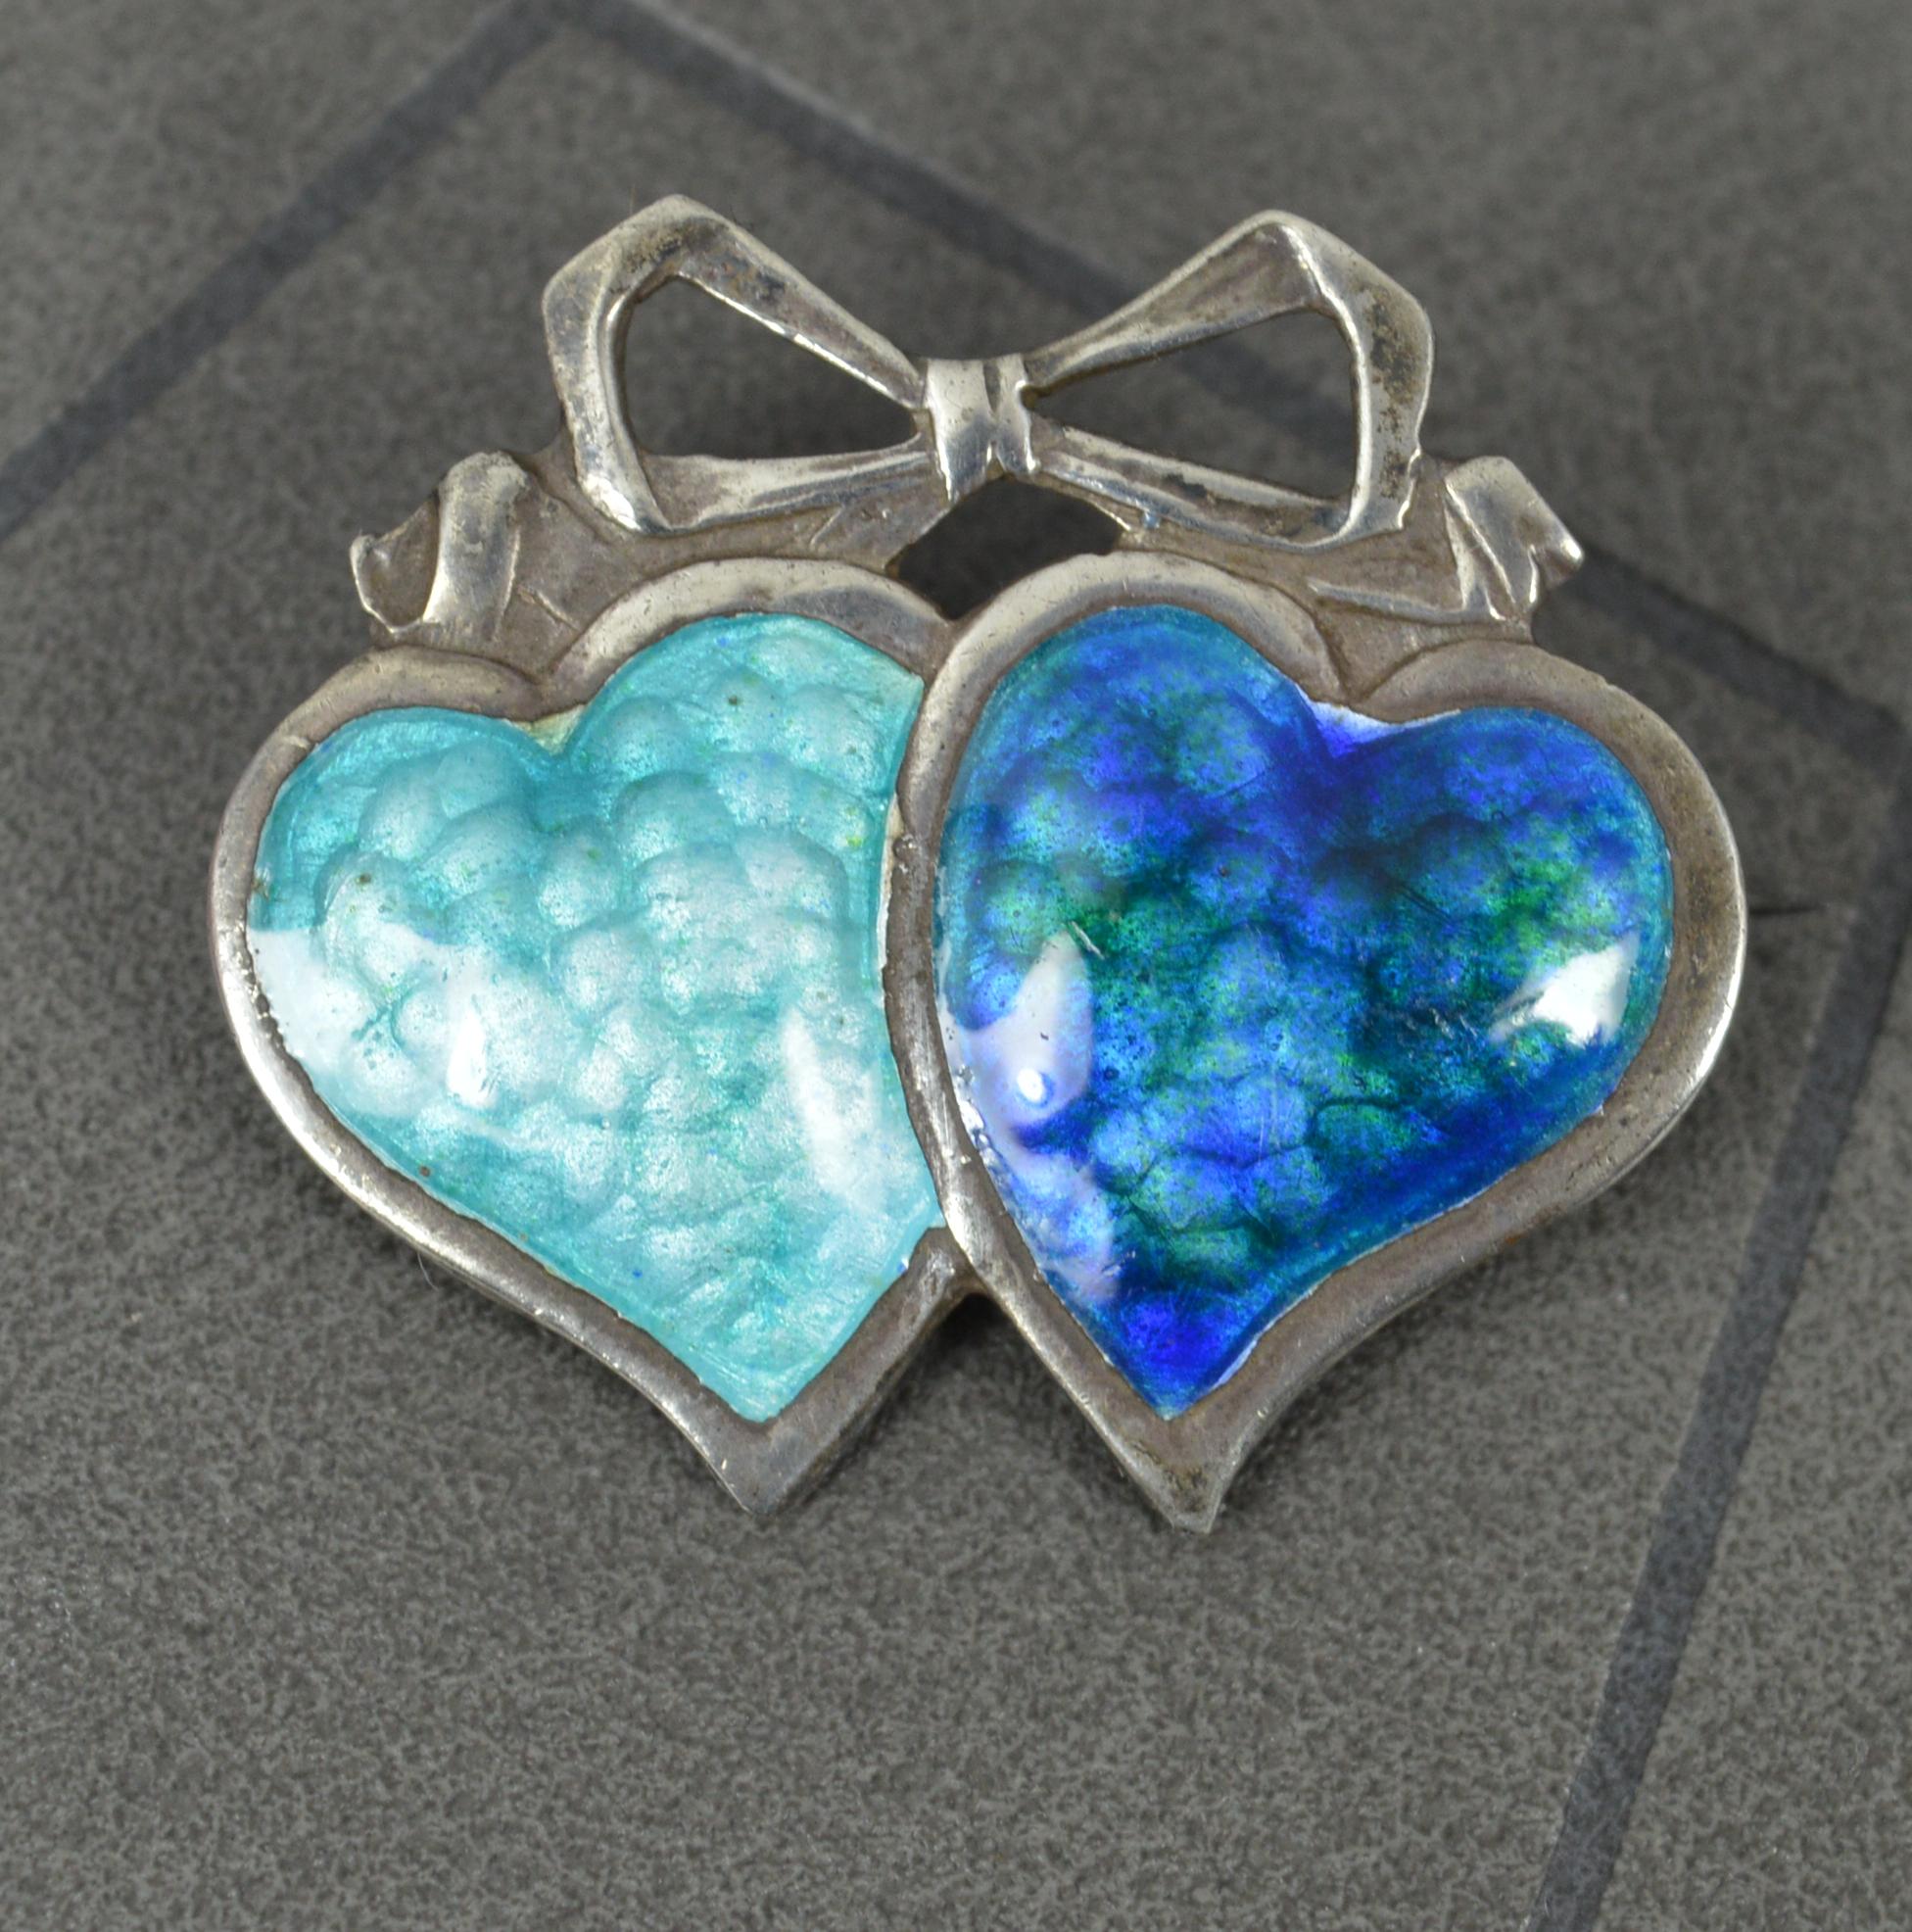 Edwardian James Fenton Sterling Silver and Enamel Double Heart Brooch In Excellent Condition For Sale In St Helens, GB